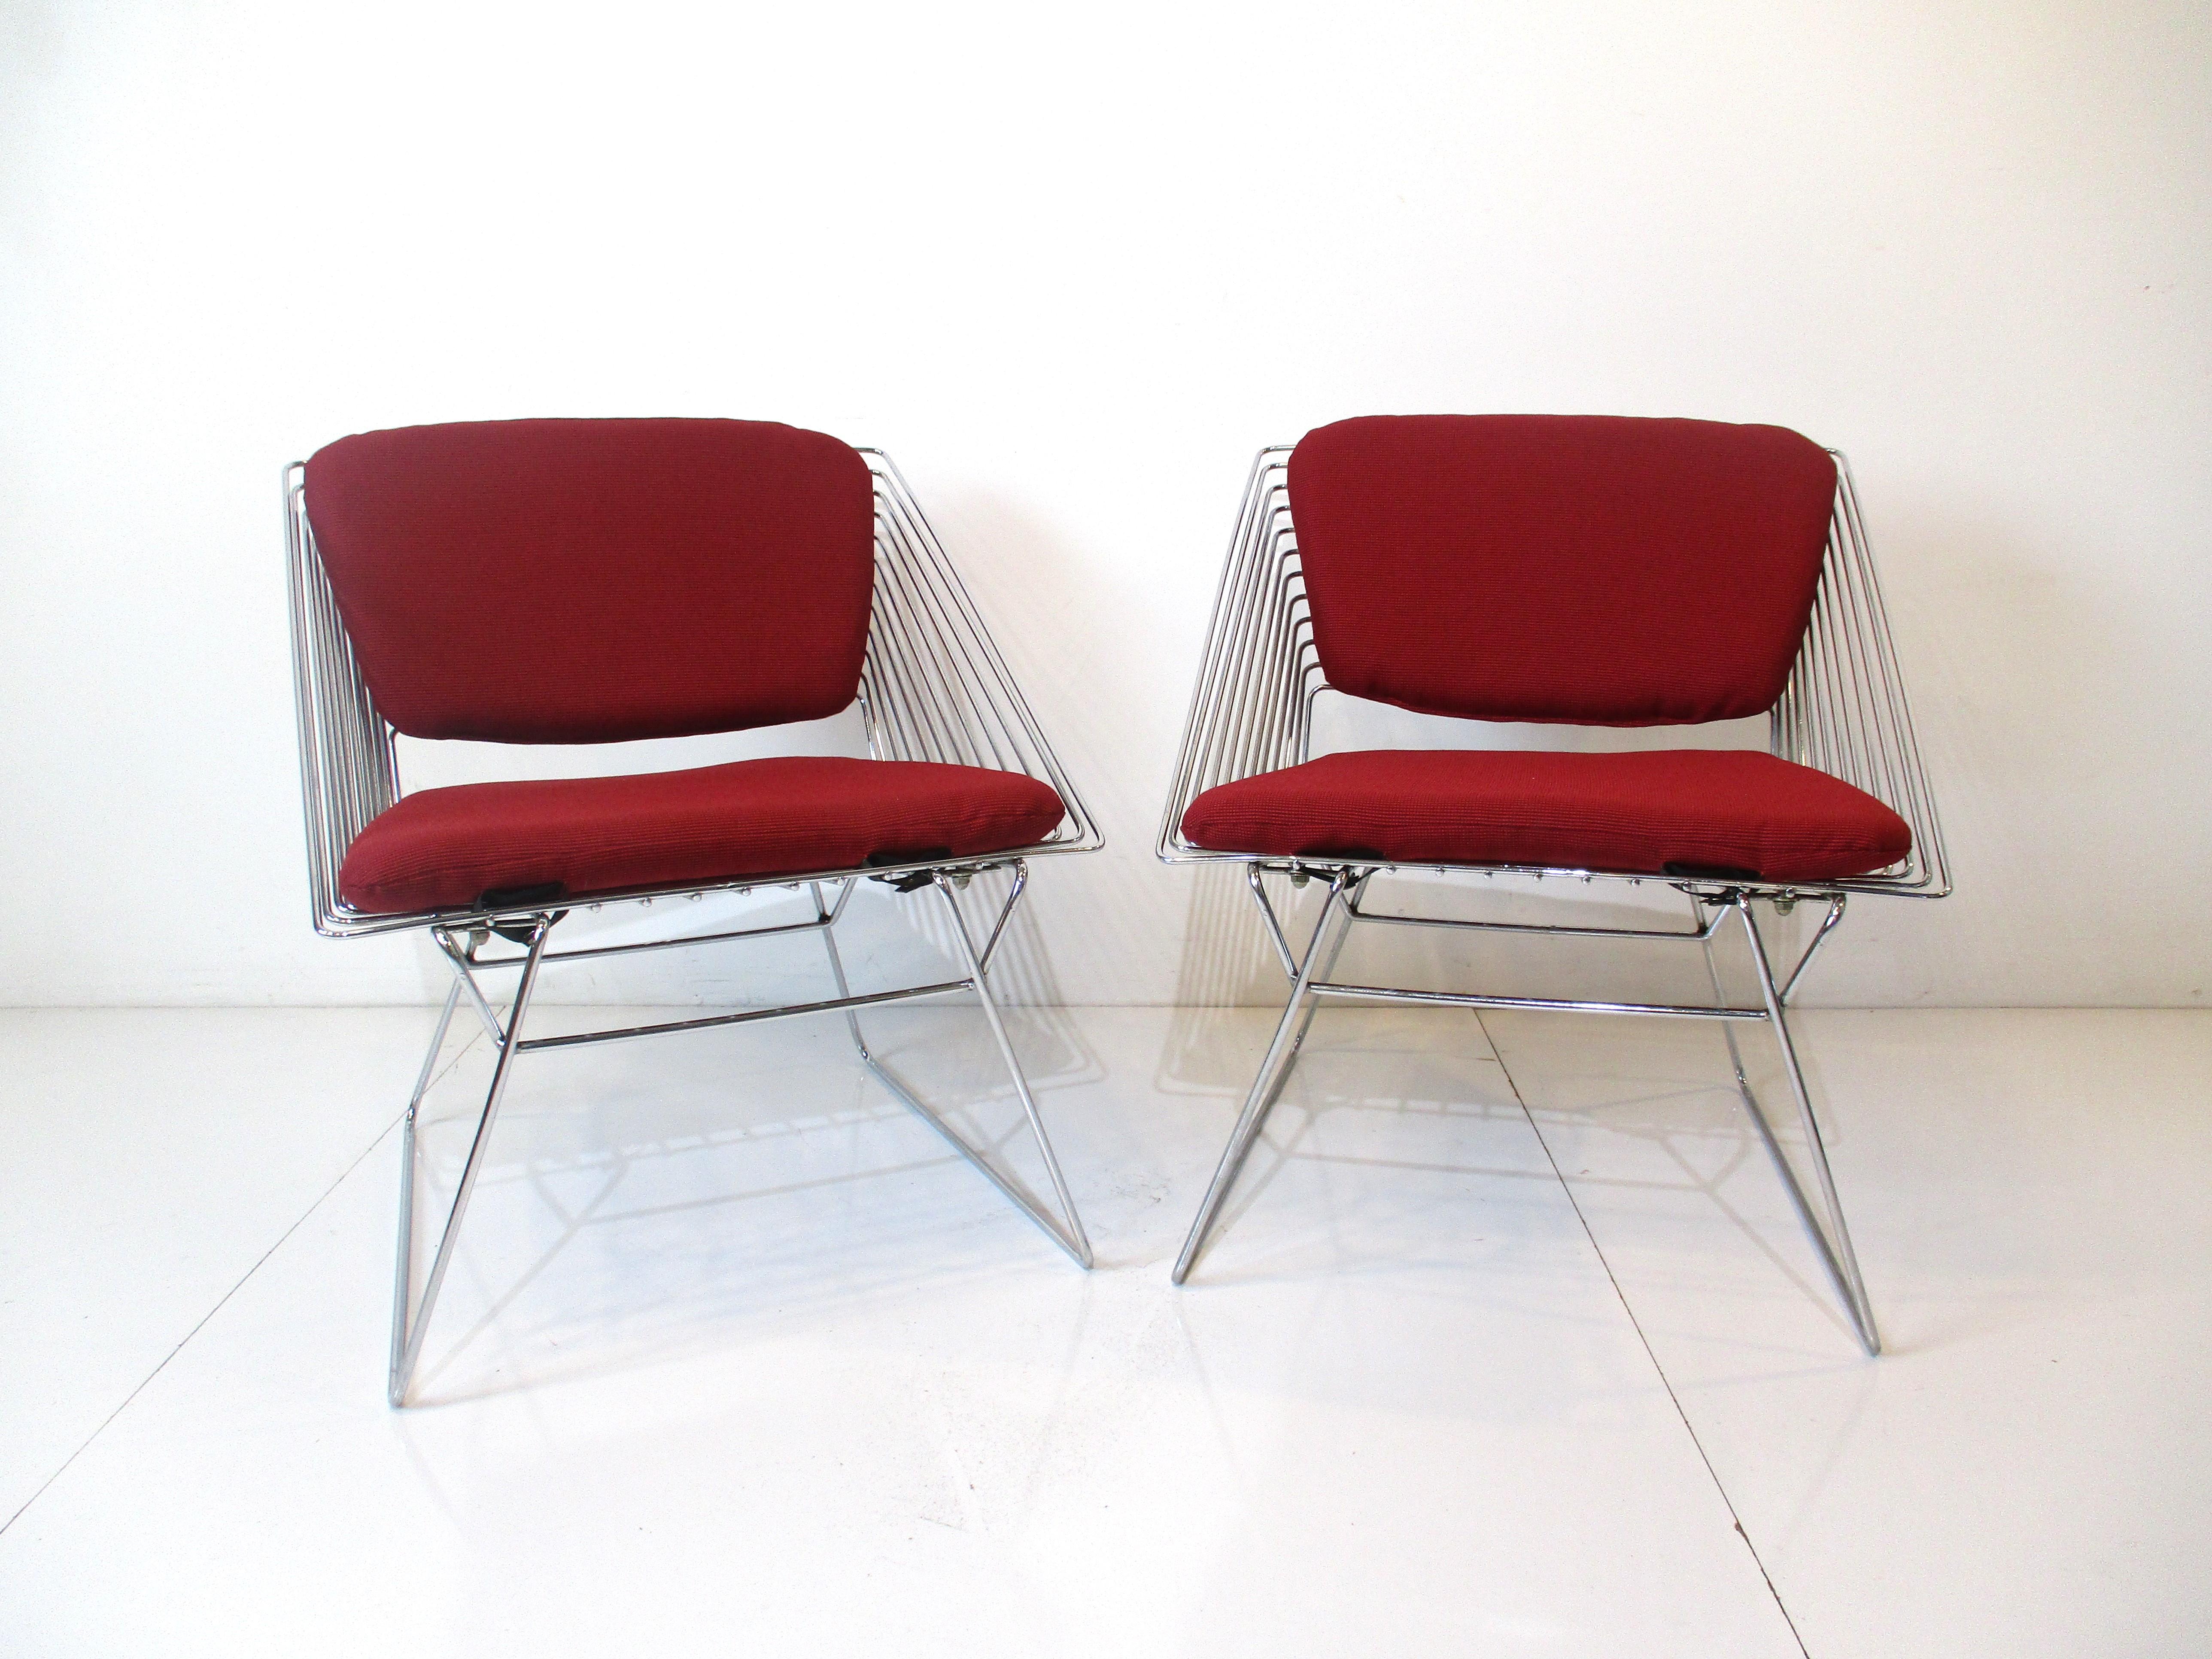 A pair of chromed metal wire grid chairs with snap on upholstered back and bottom cushions. These geometric cube styled lounge chairs are comfortable and have that lighter modern 1970's look with the new woven darker reddish contract fabric sourced